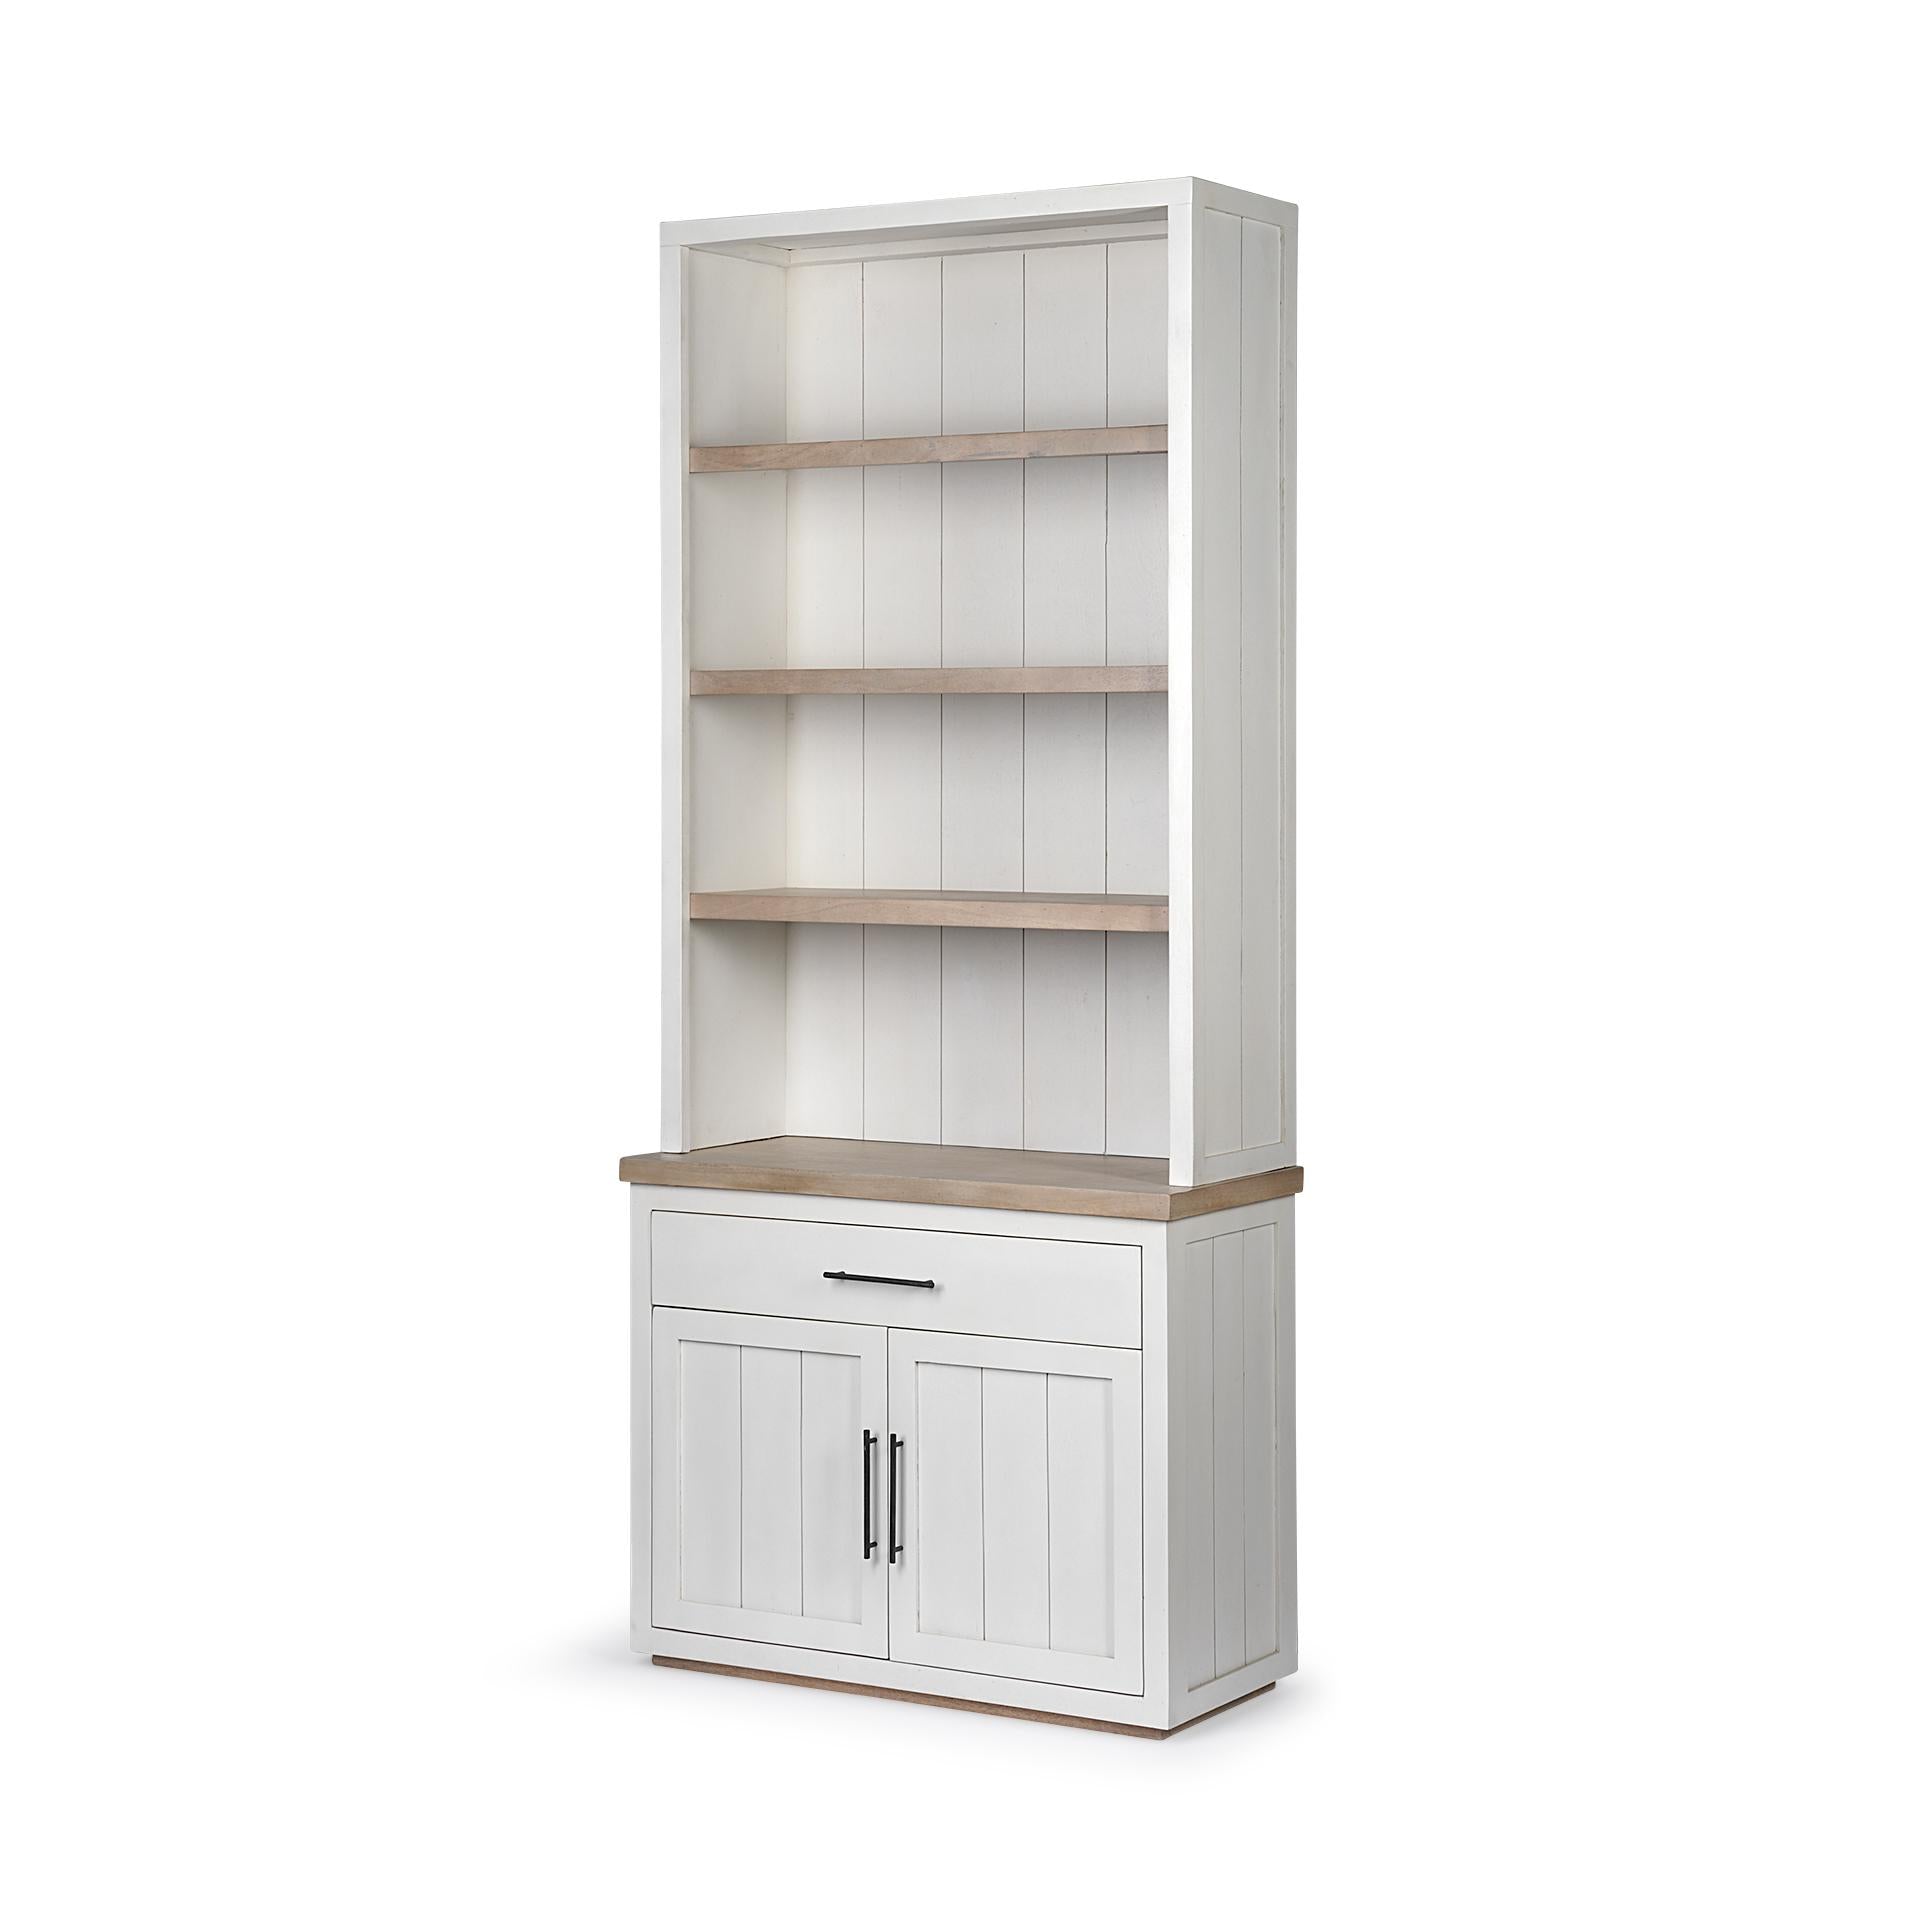 White and Medium Brown Wood Shelving Unit with 3 Shelves Default Title